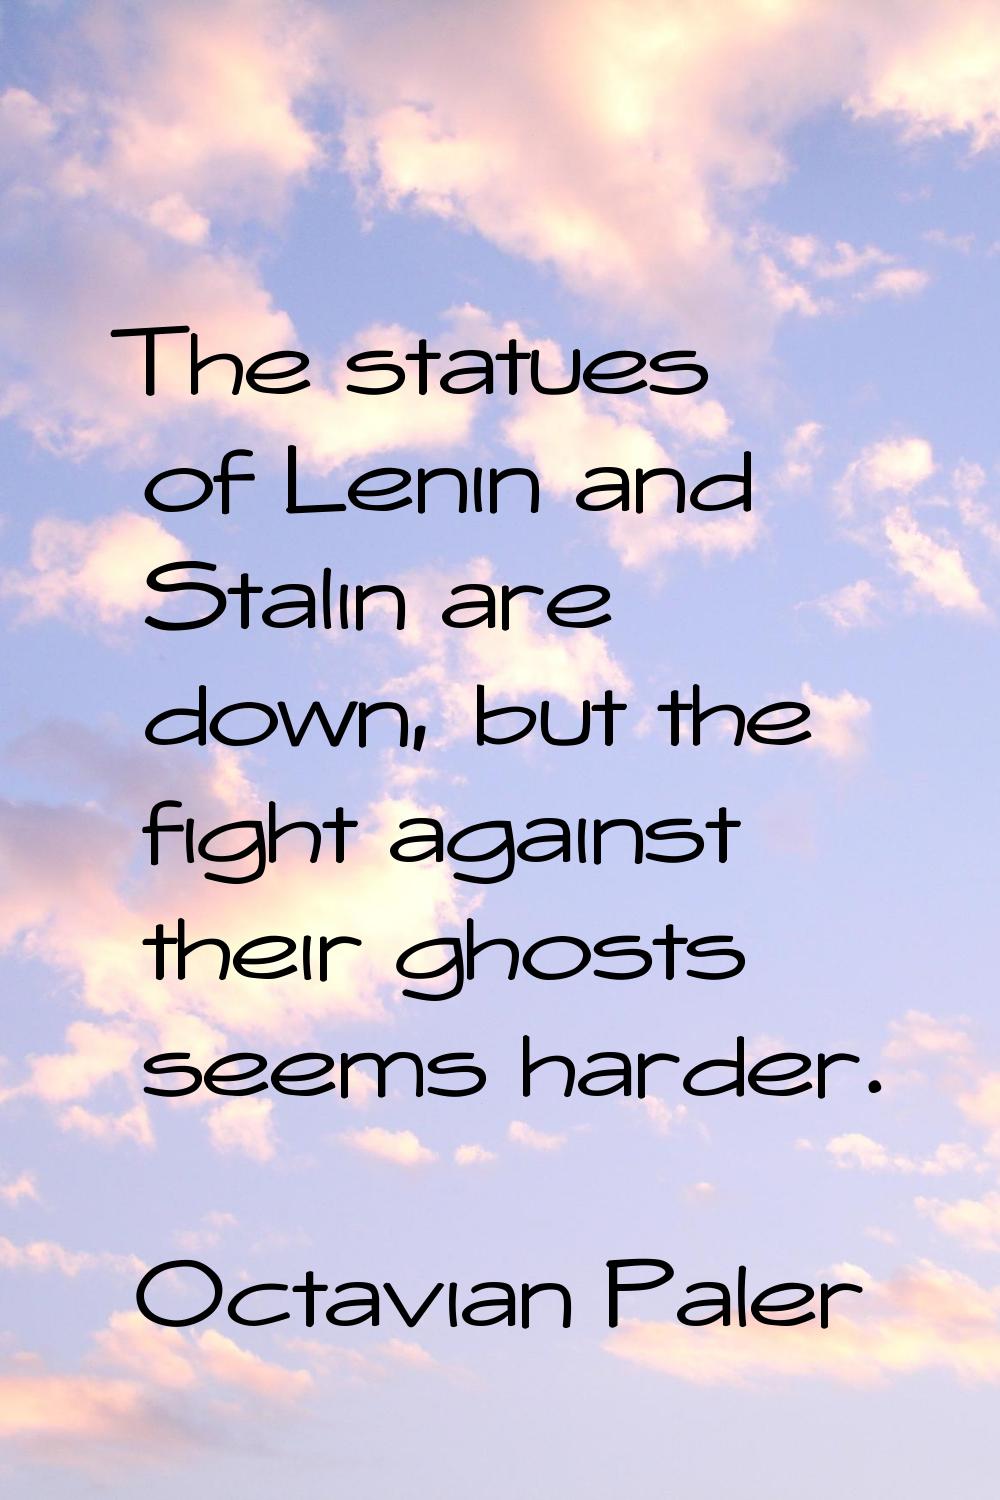 The statues of Lenin and Stalin are down, but the fight against their ghosts seems harder.